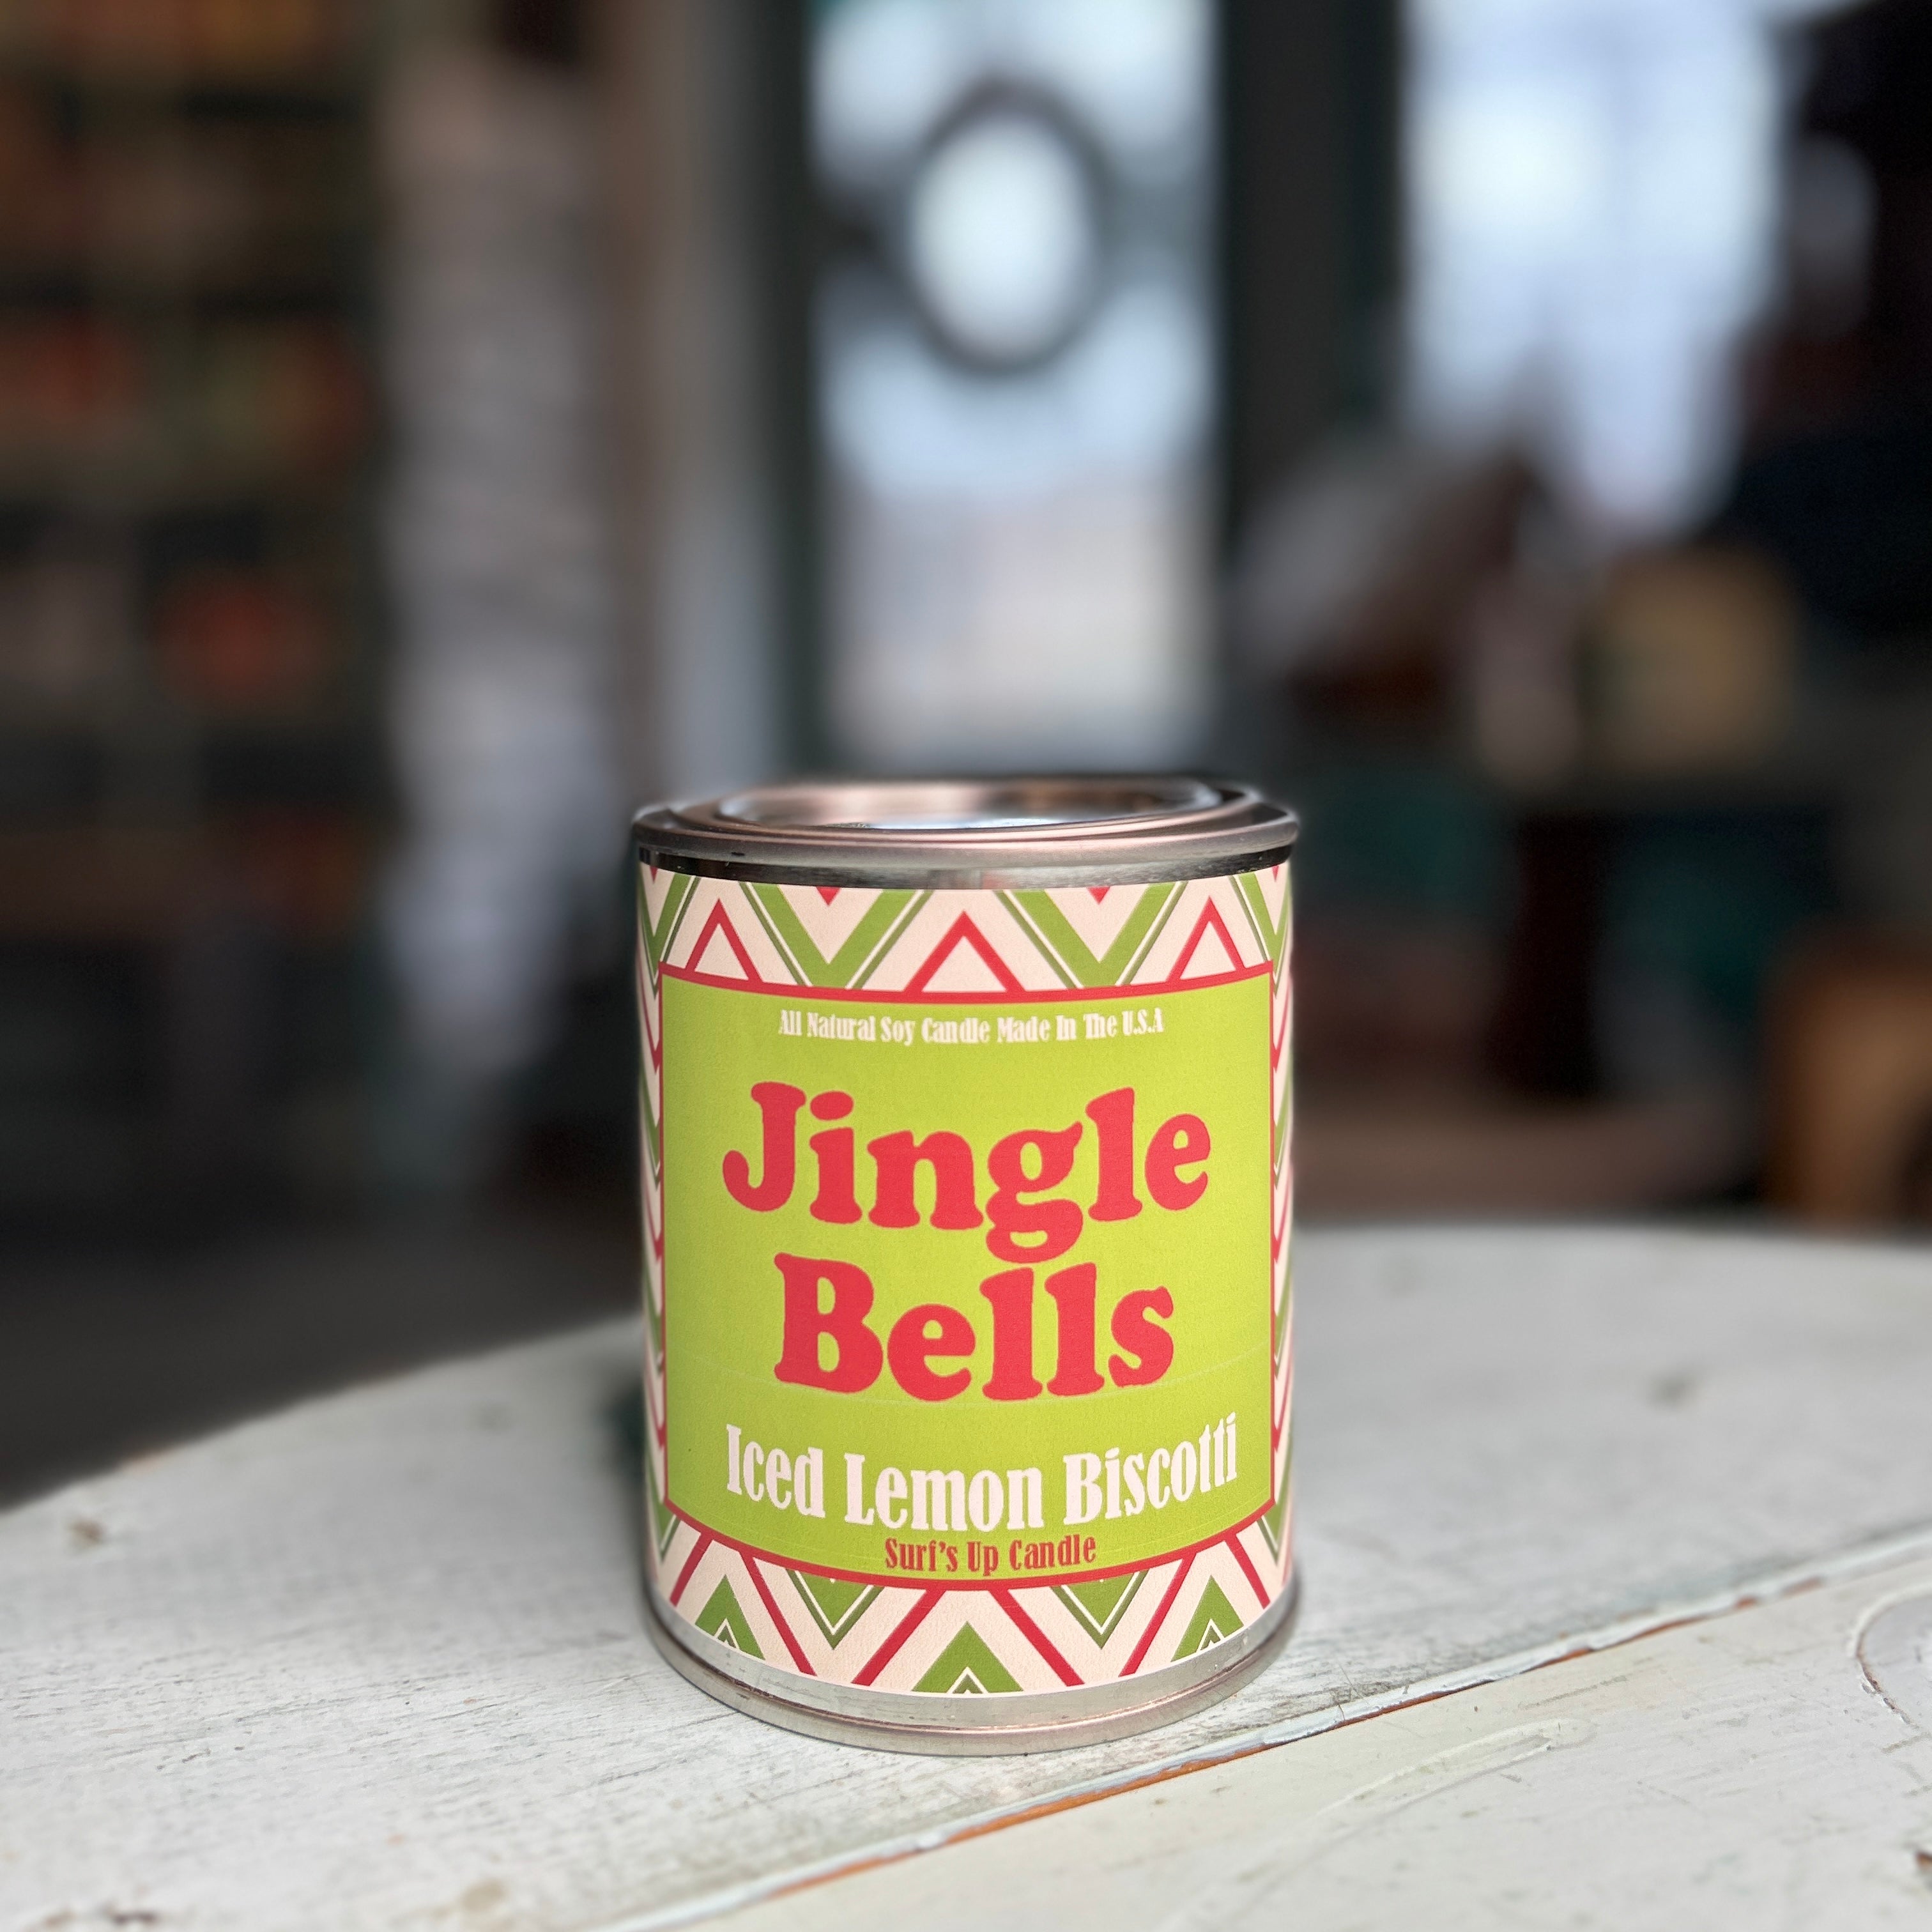 Jingle Bells Iced Lemon Biscotti Paint Can Candle - Christmas Collection